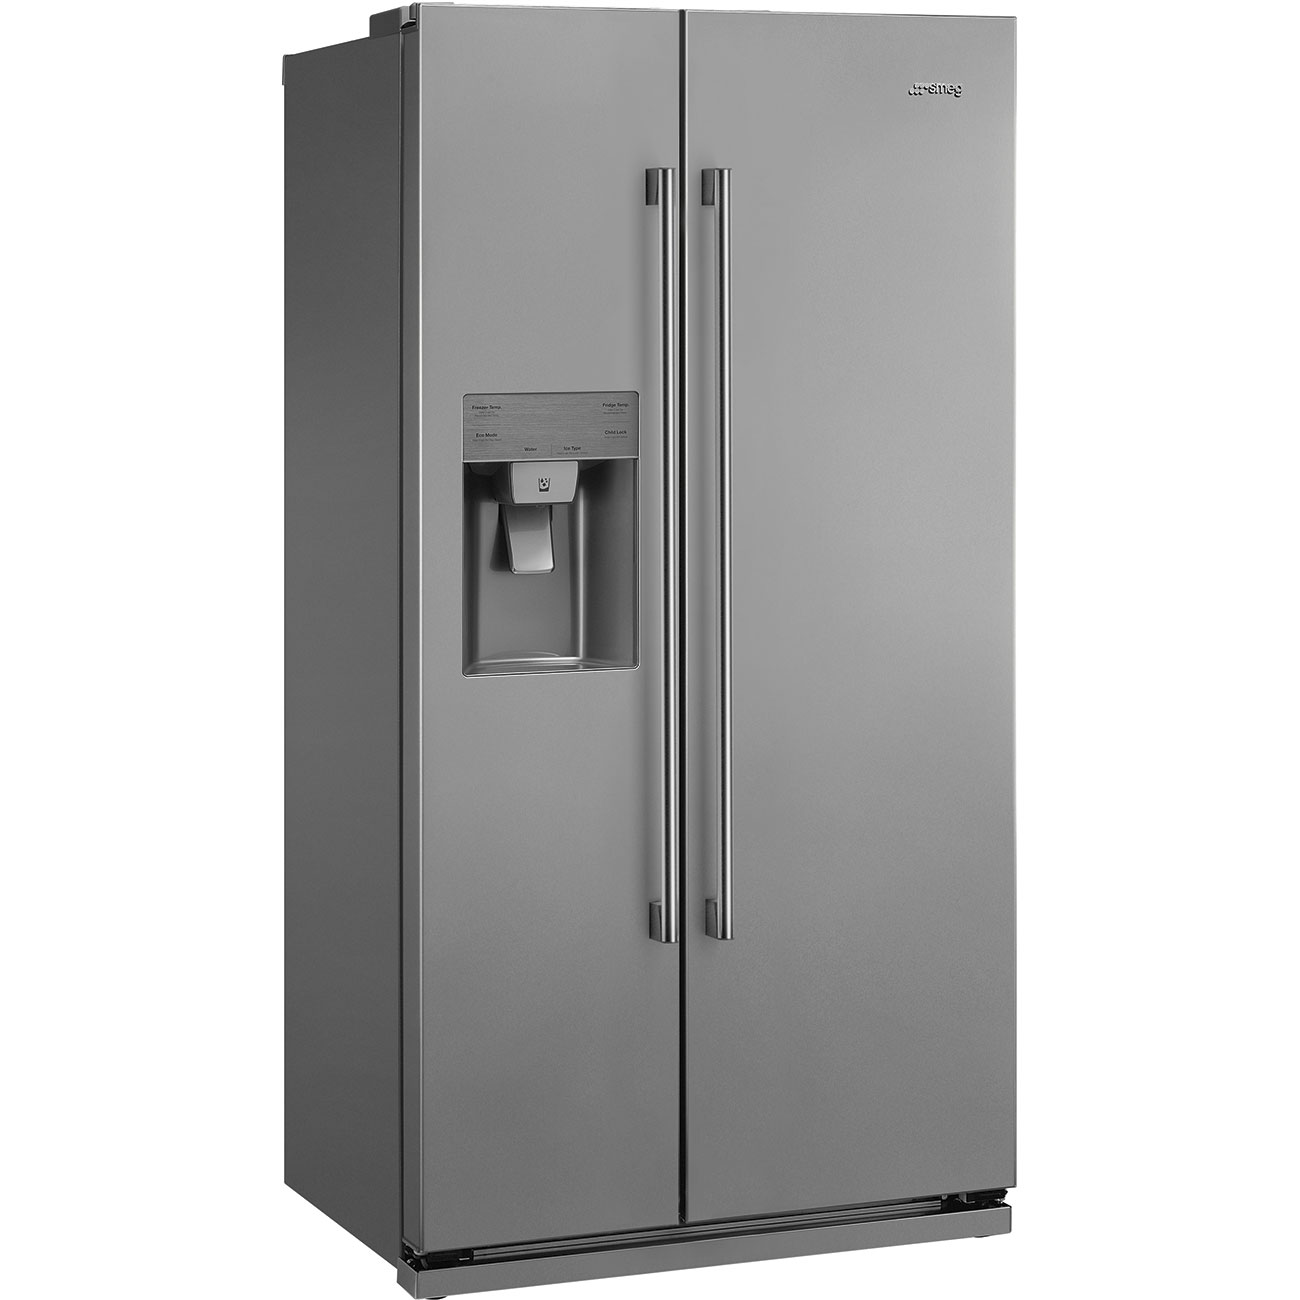 Side-by-side Free standing refrigerator - Smeg_1